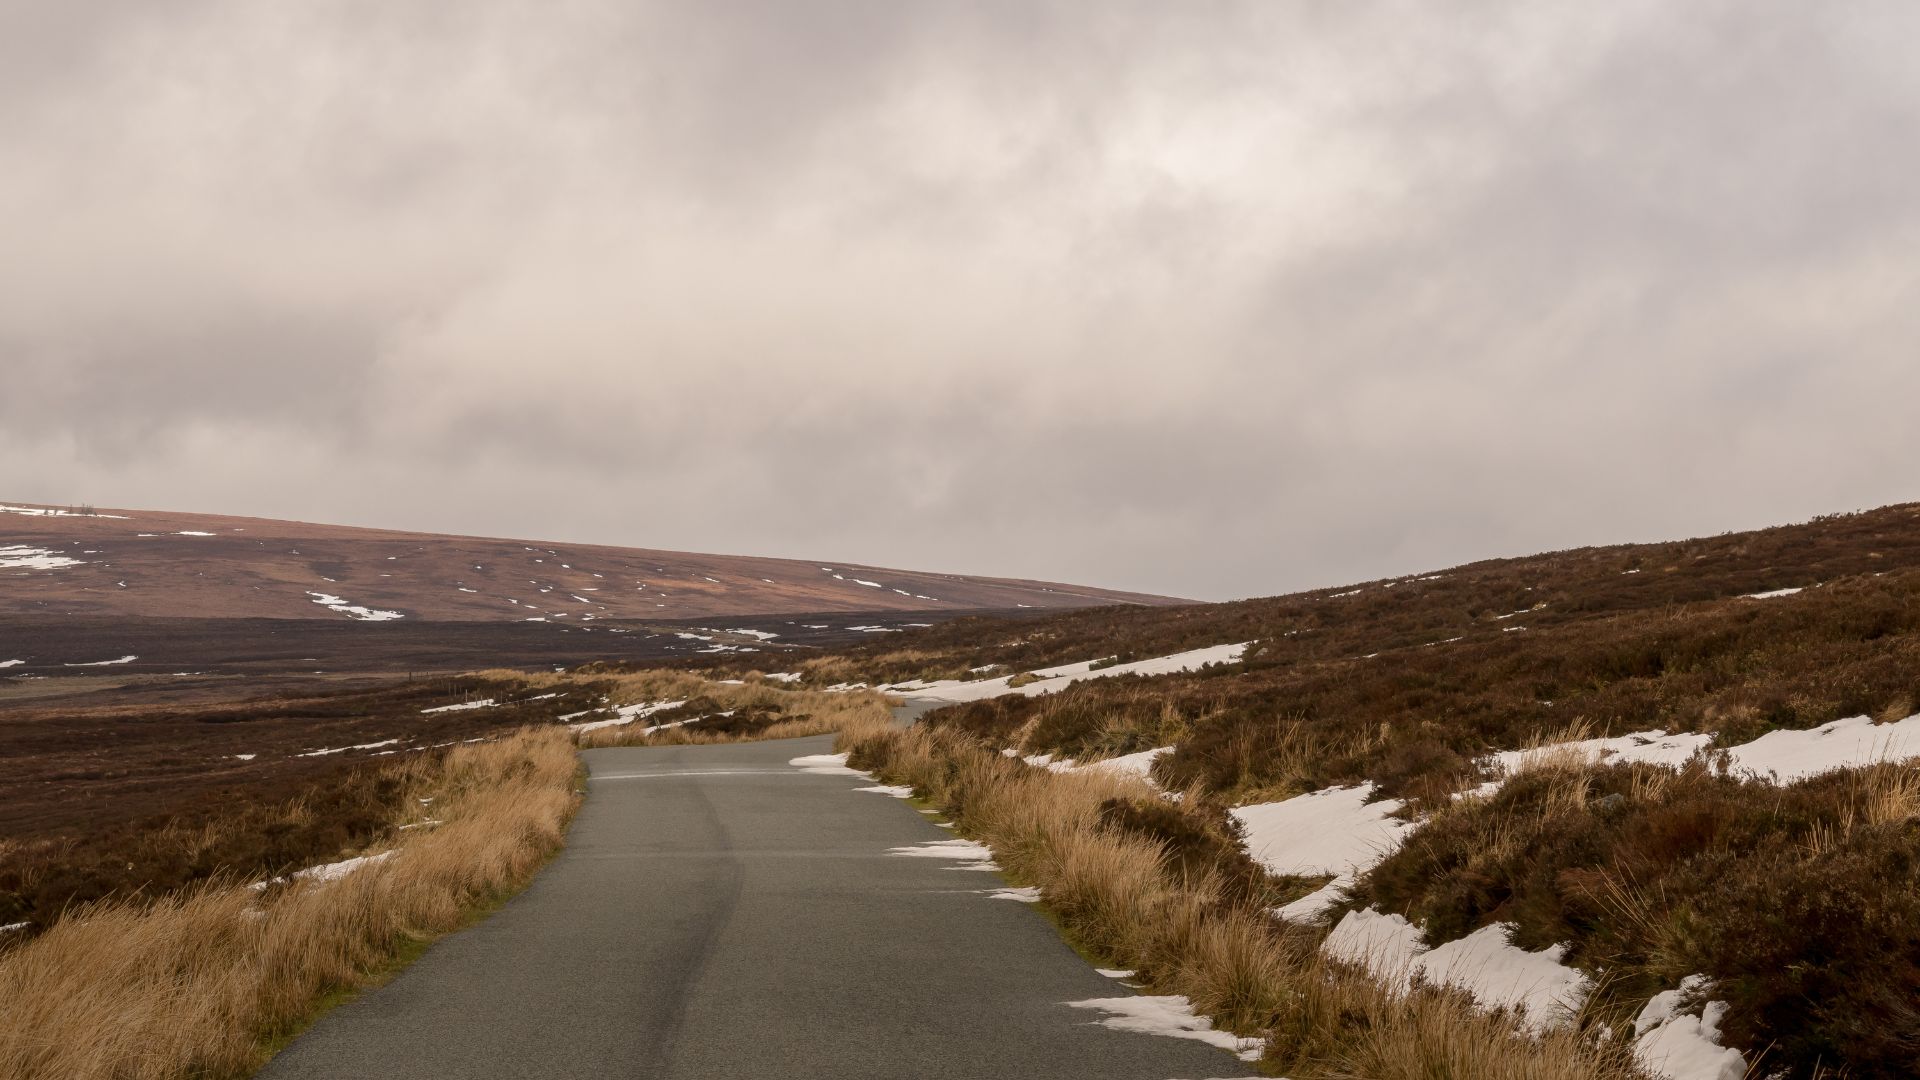 The Old Military Road in Wicklow